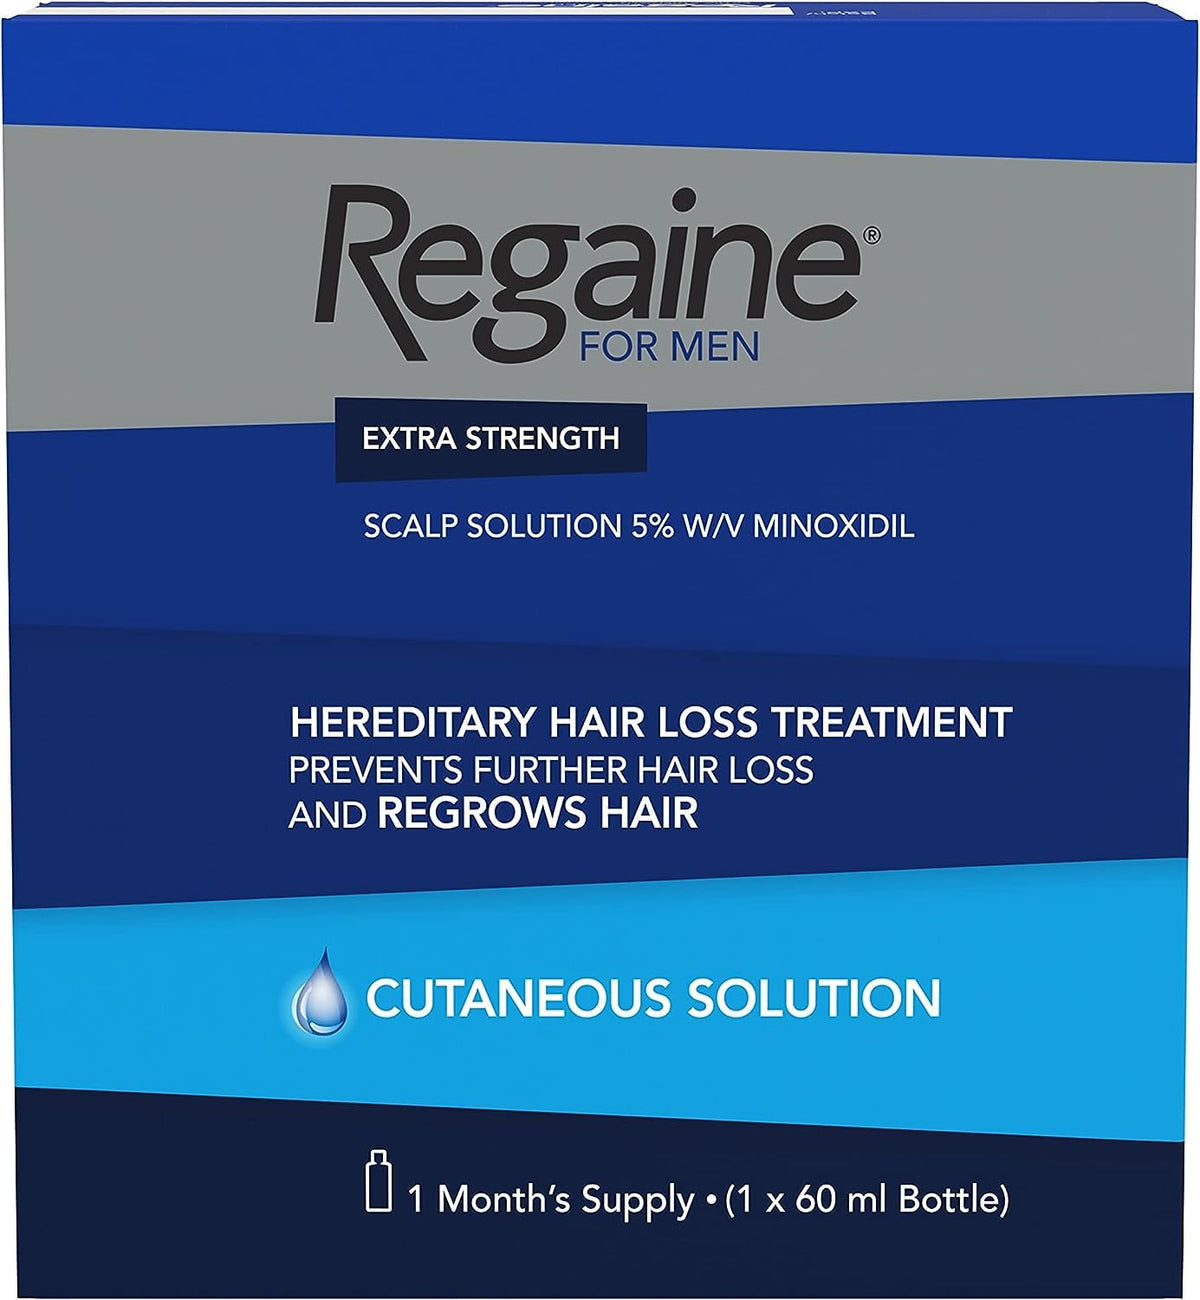 Regaine For Men Extra Strength Scalp Solution, Hereditary Hair Loss Treatment for Men with Minoxidil, Helps Regrows Hair and Prevents Further Hair Loss, 60 ml (1 Month Supply)